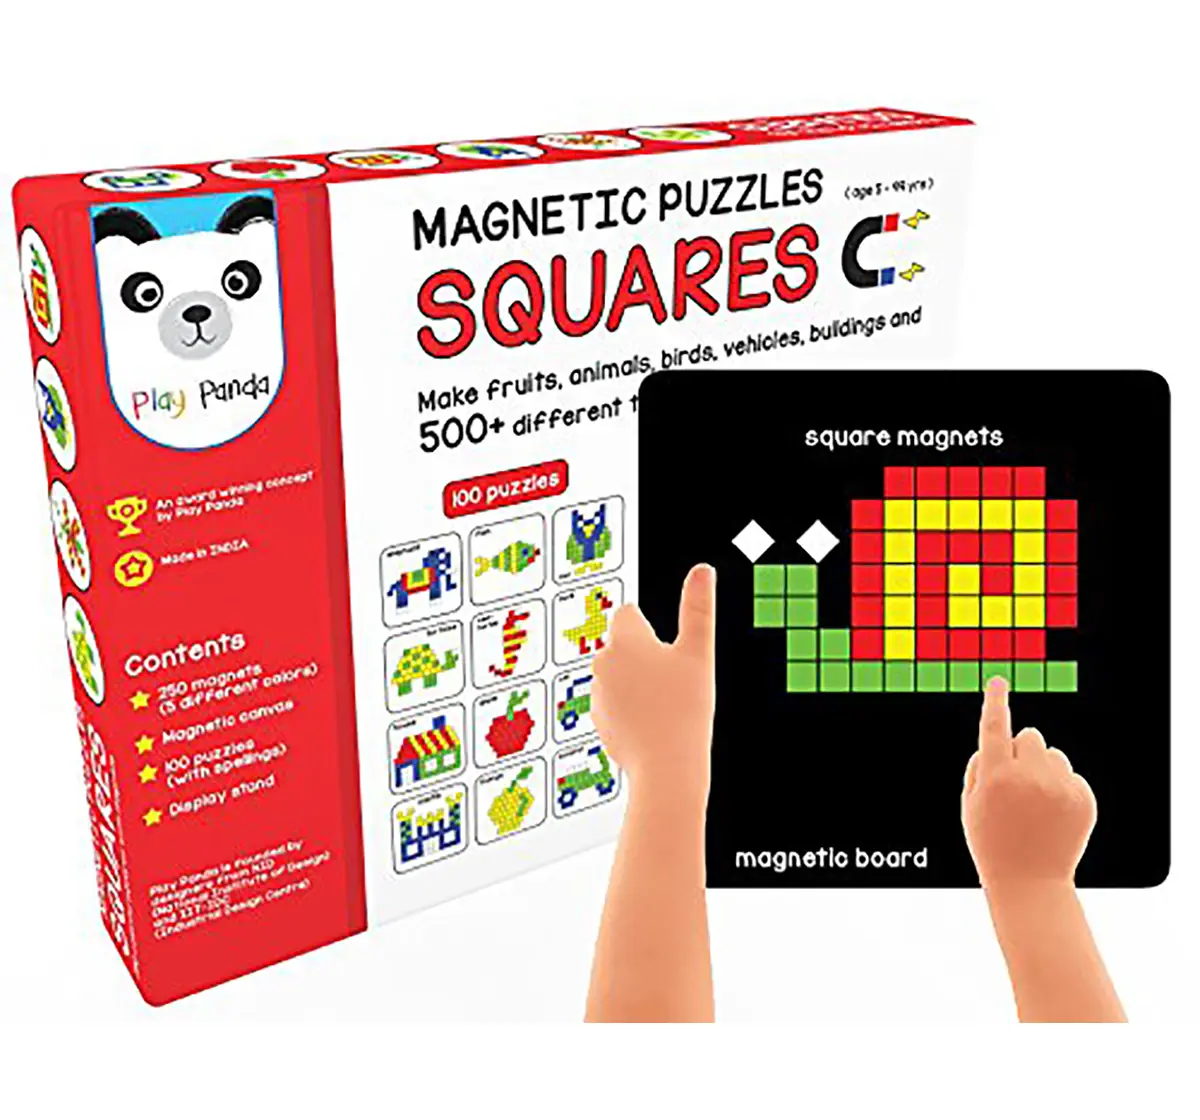 Play Panda Magnetic Puzzles : Squares With 250 Colorful Magnets, 100 Puzzle Book, Magnetic Board And Display Stand Puzzles for Kids Age 5Y+